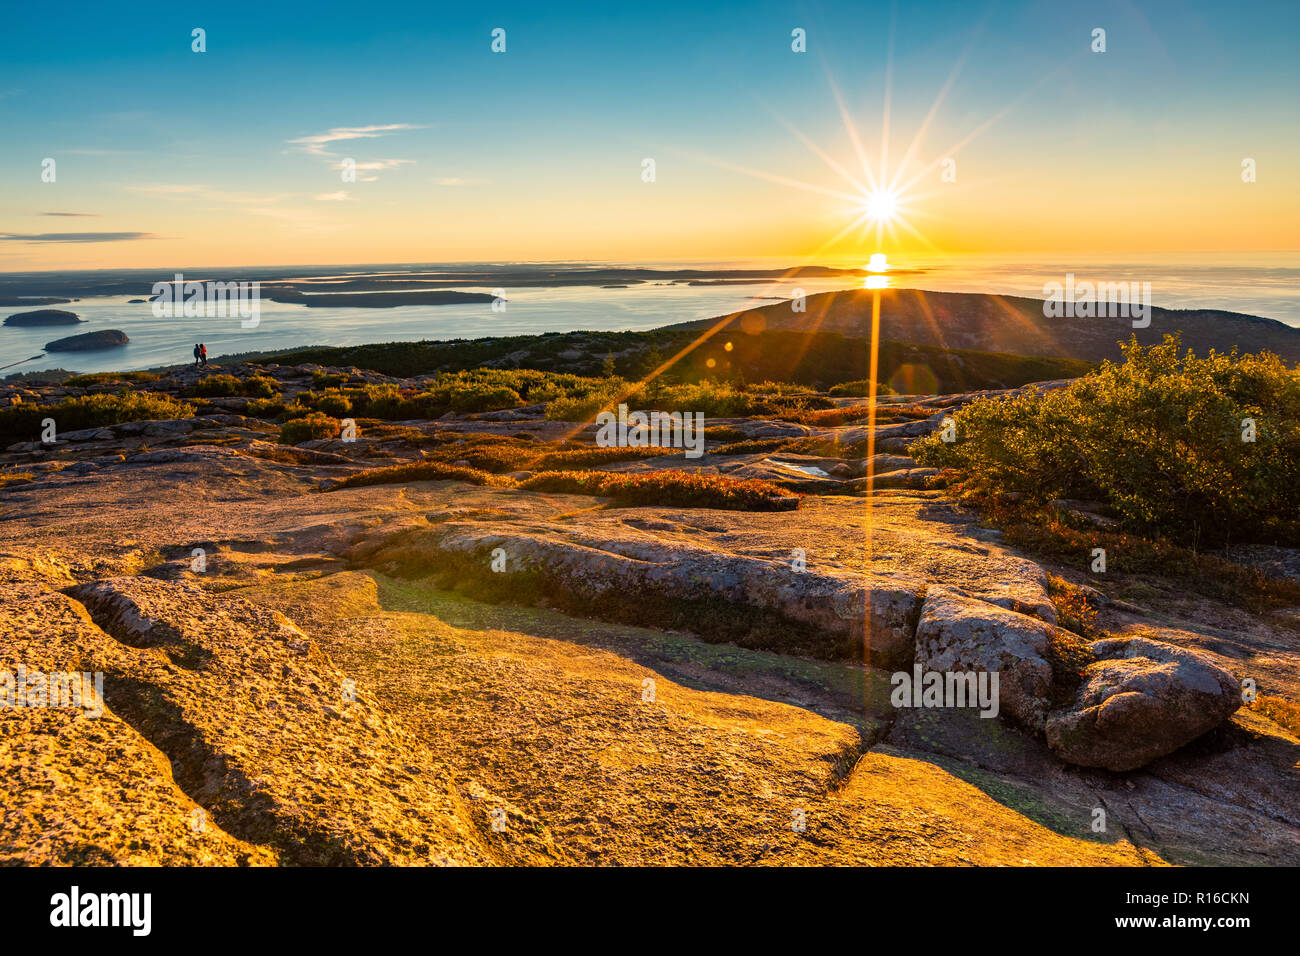 Sunrise in Acadia National Park observed from the top of Cadillac mountain. Stock Photo